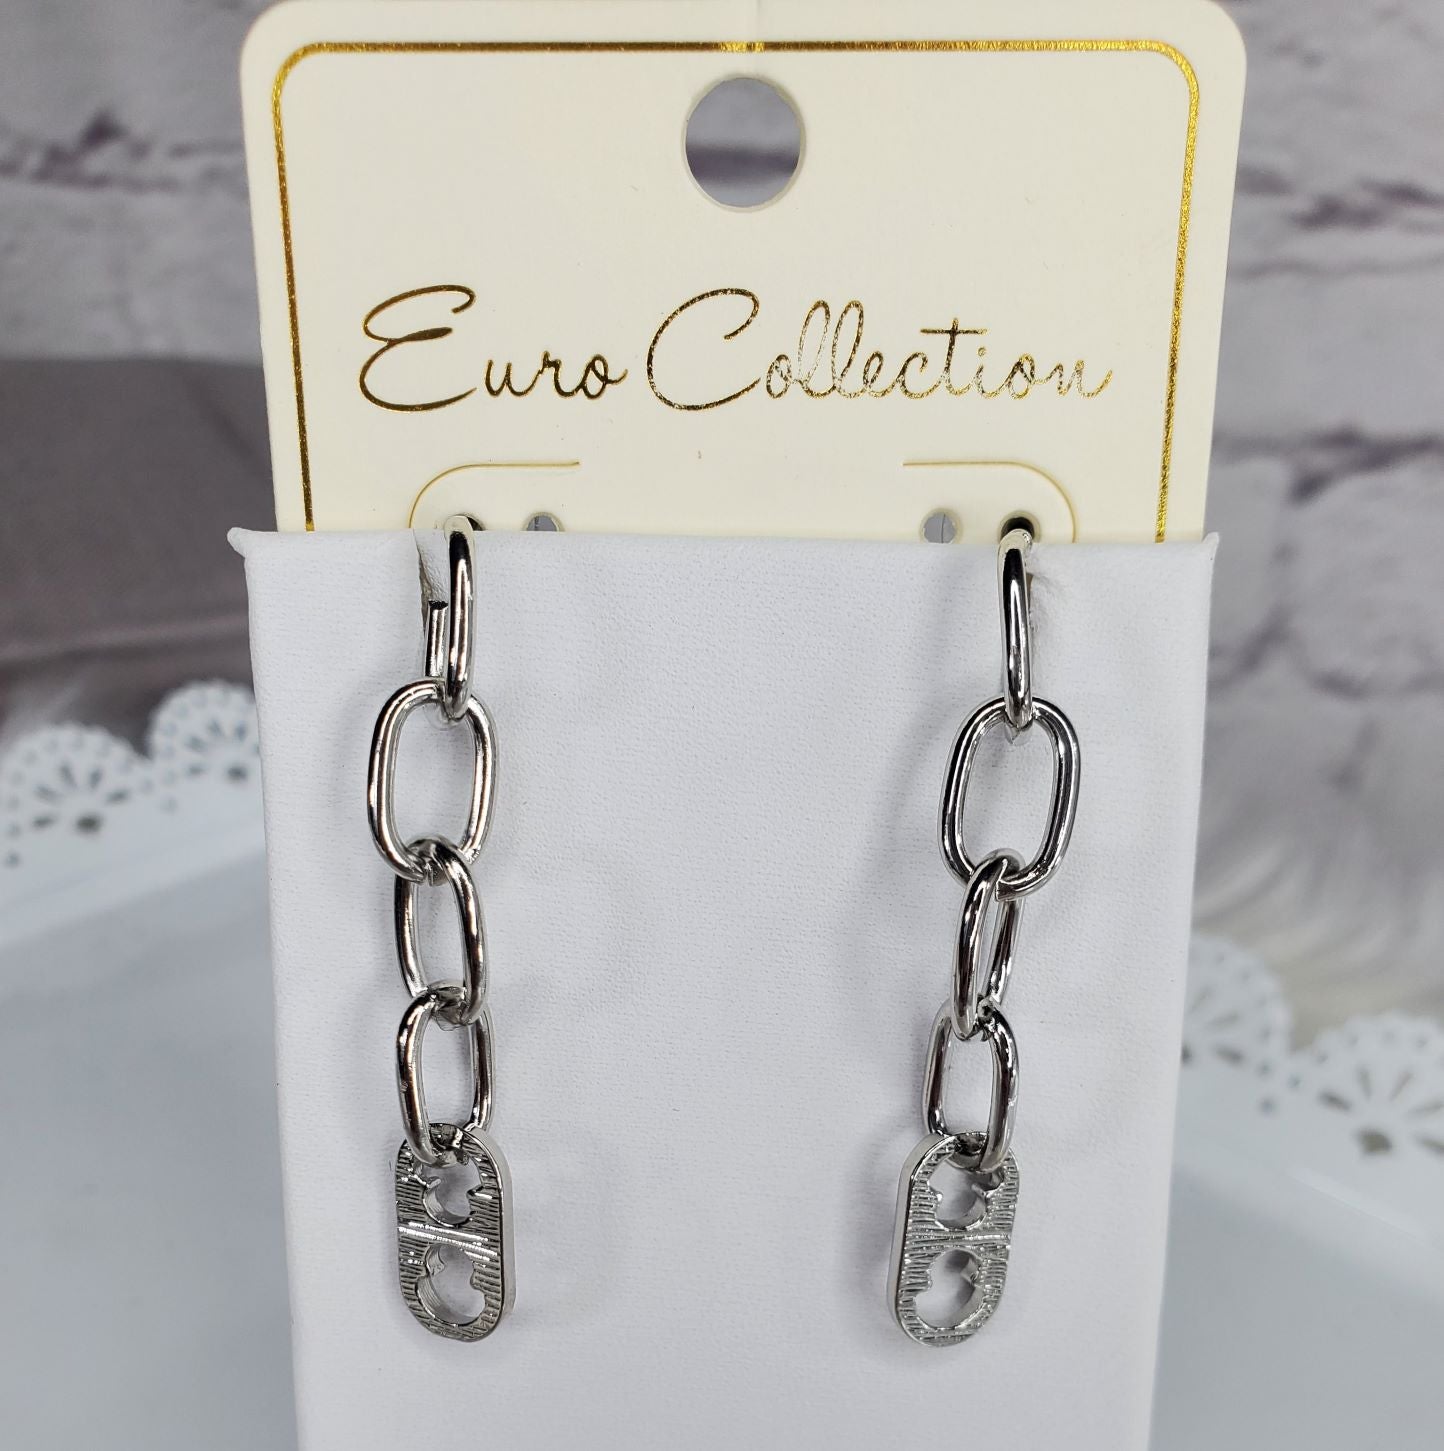 Euro Collection 4-link chain and charm earrings